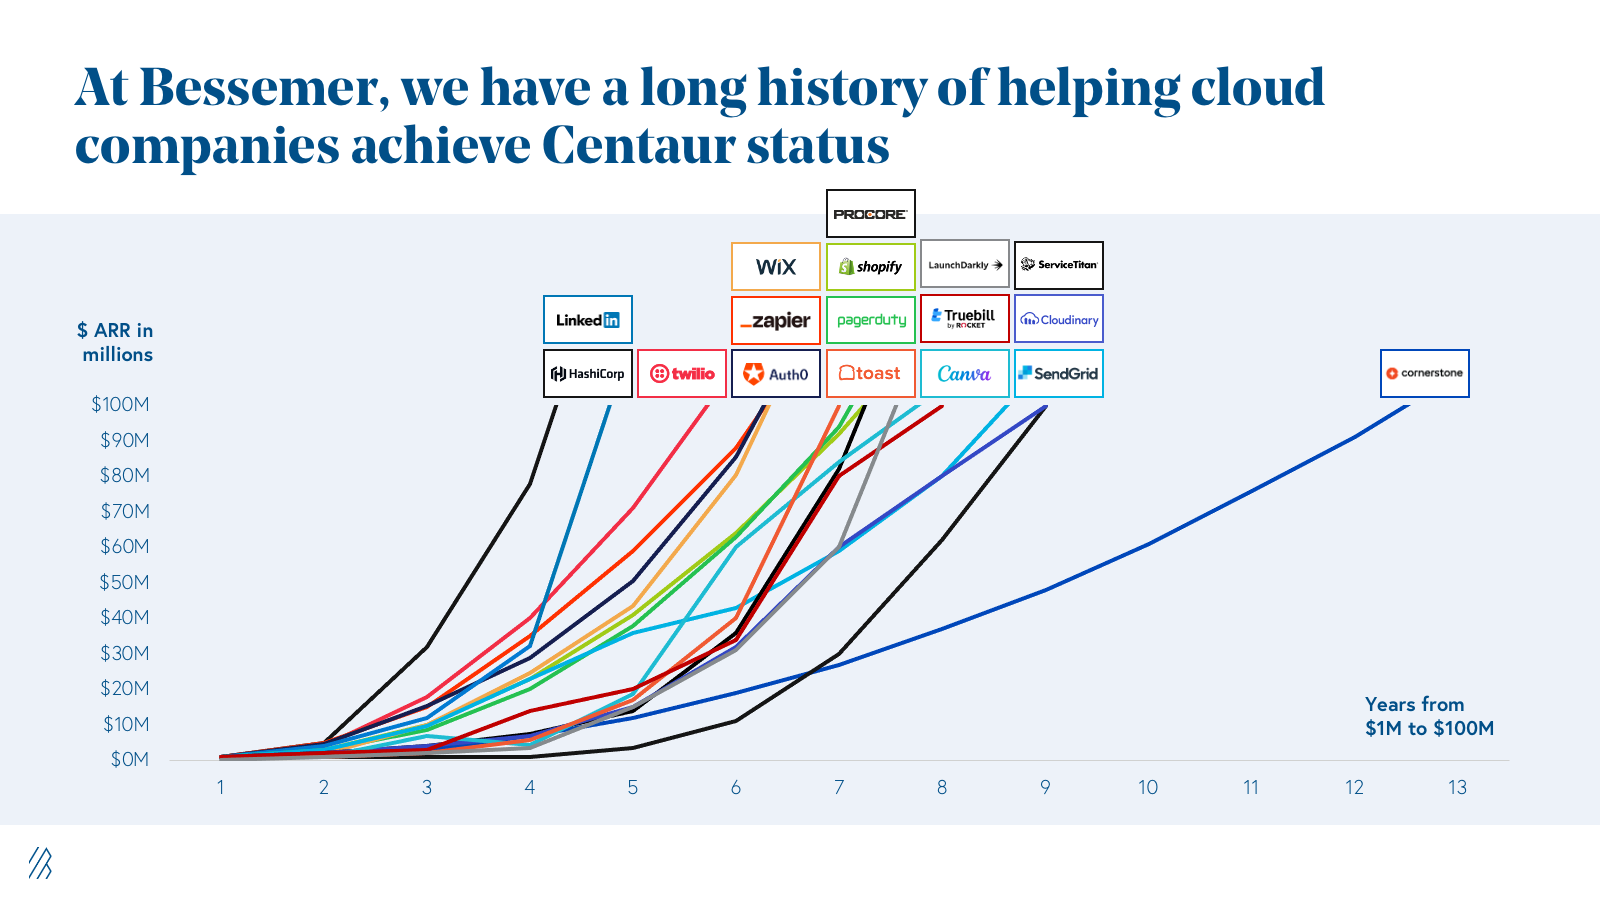 At Bessemer, we have a long history of helping cloud companies achieve Centaur status